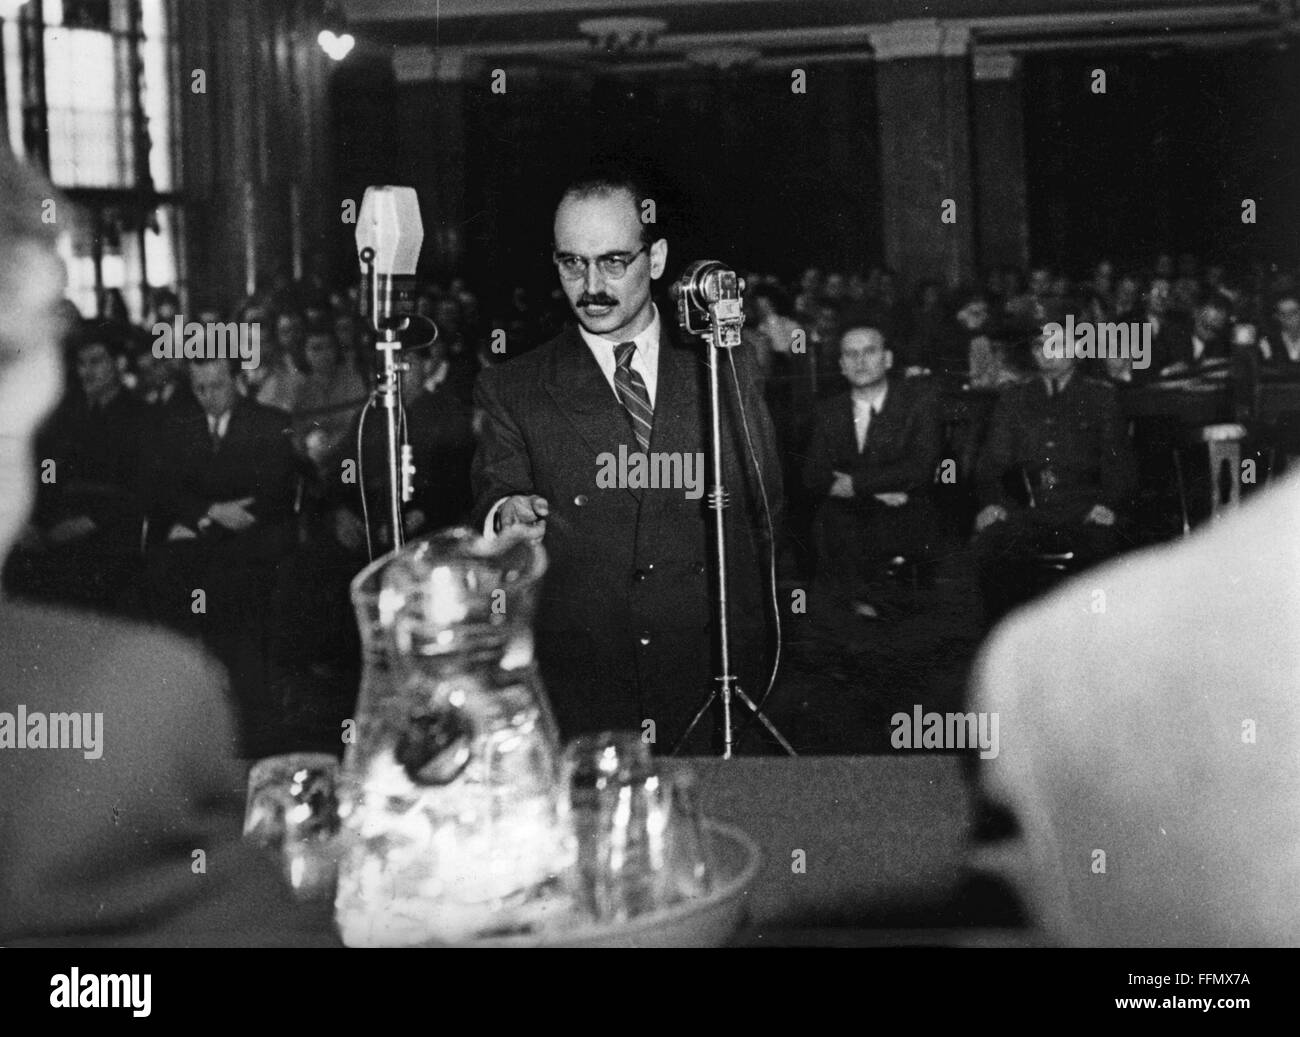 Szalai, Andras, 6.2.1917 - 15.10.1949, Hungarian politician (MDP), half length, during his testimony at the trial against him and Laszlo Rajk for alleged 'Titoism' and espionage, Budapest, 16. - 24.9.1949, Stock Photo